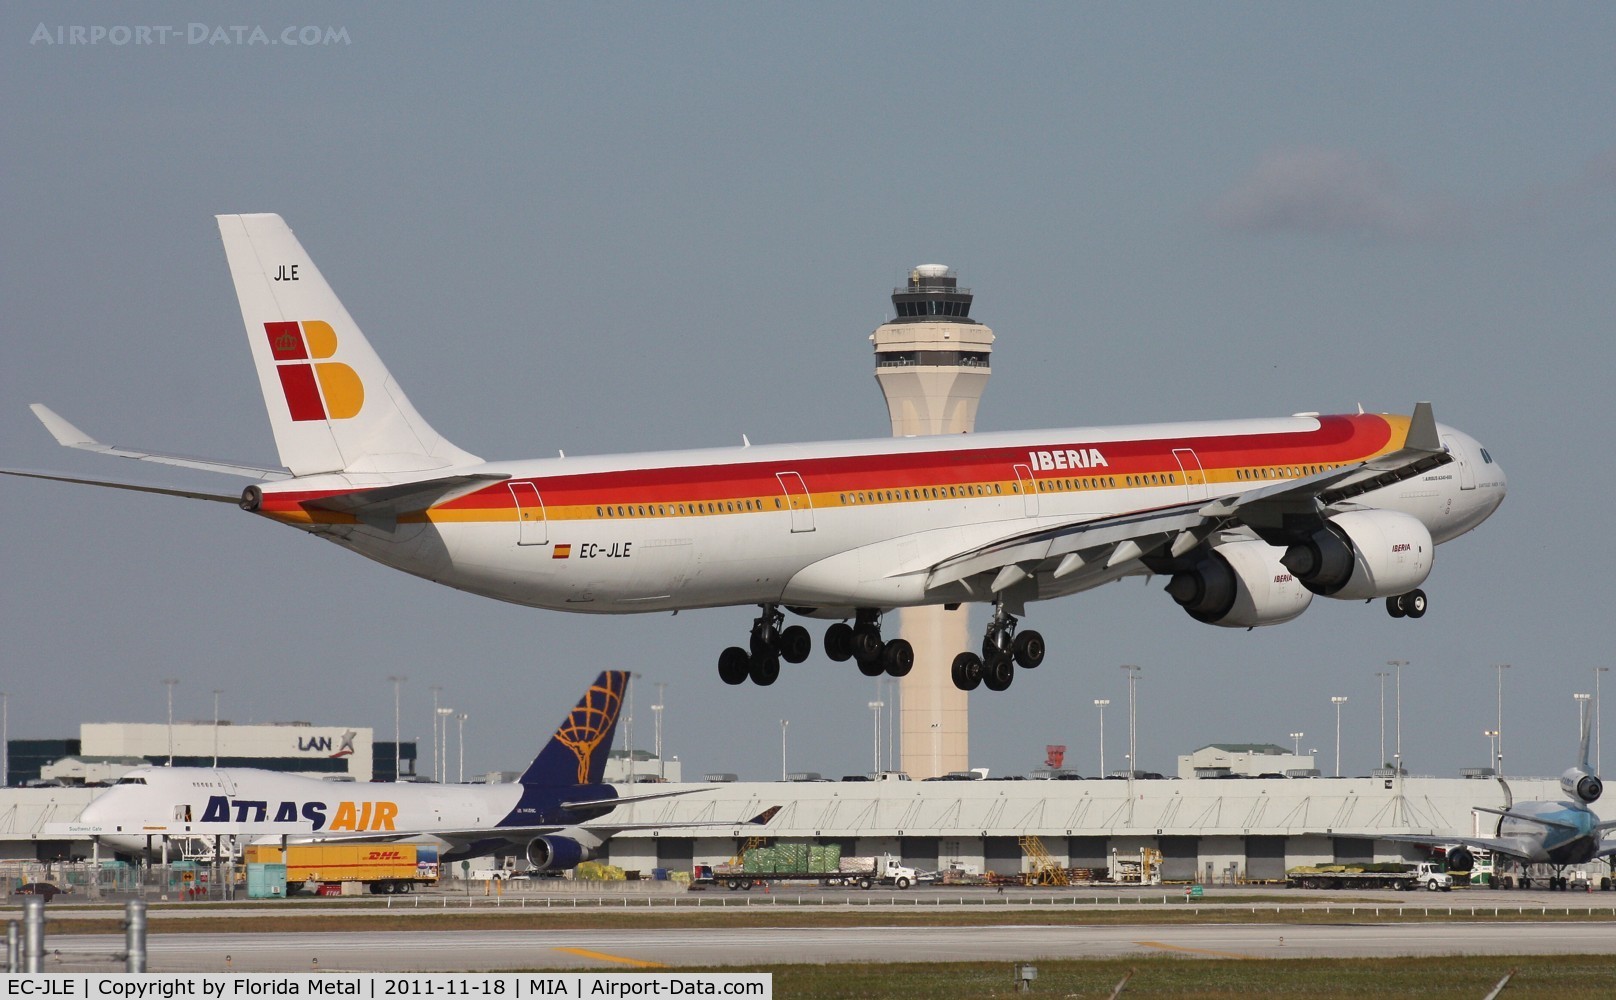 EC-JLE, 2005 Airbus A340-642 C/N 702, Iberia with the tower and the 16 ft shorter 747-400 in the background.